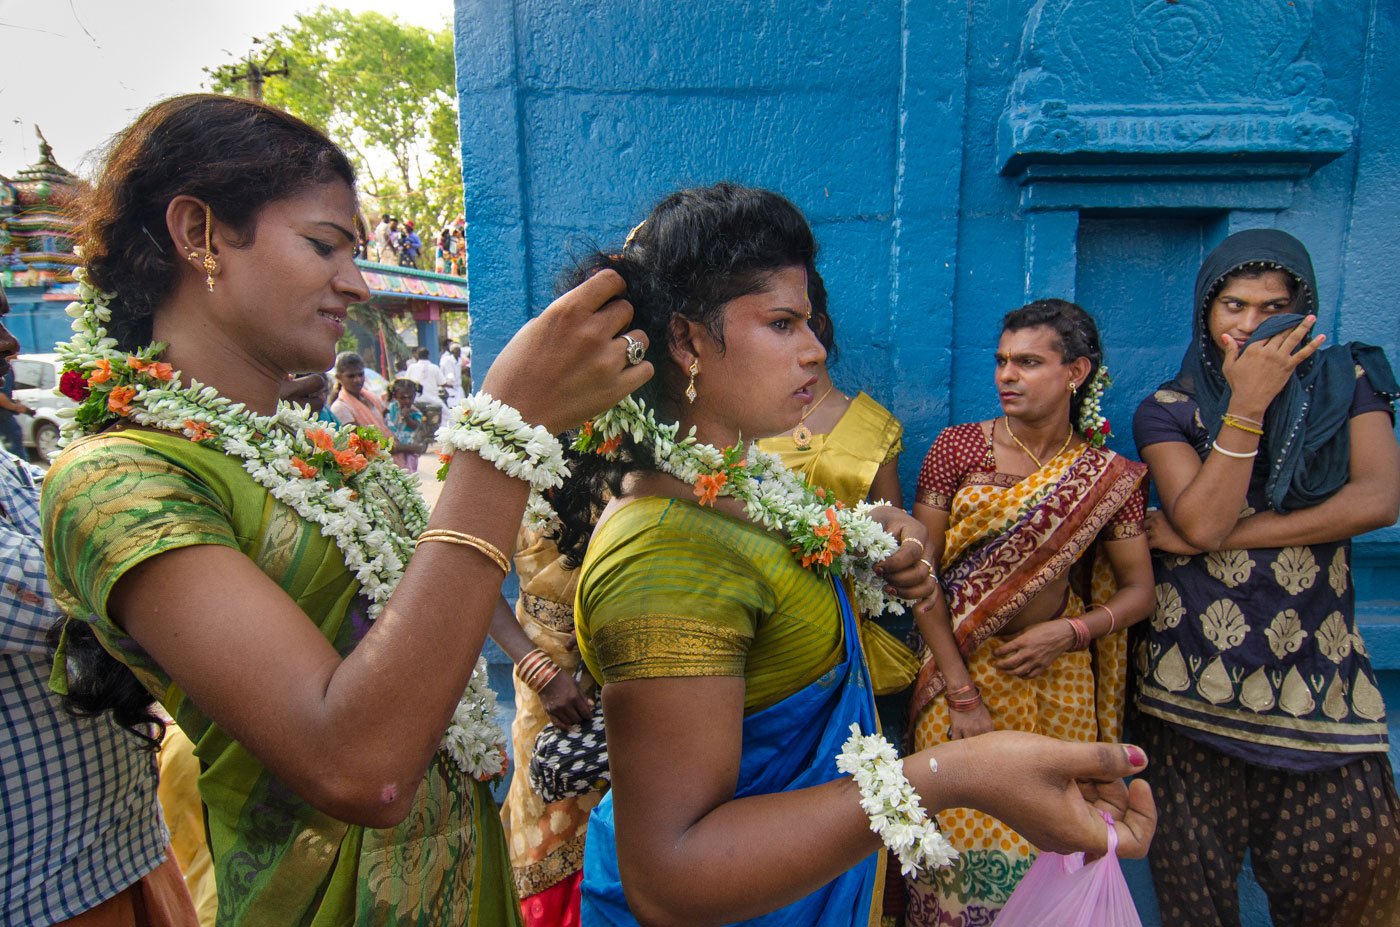 Aravanis enact a story from the Mahabharata in which they get married to Lord Aravan. Here, they are seen getting ready for the wedding. A transgender woman decorating another transgender's hair with flowers